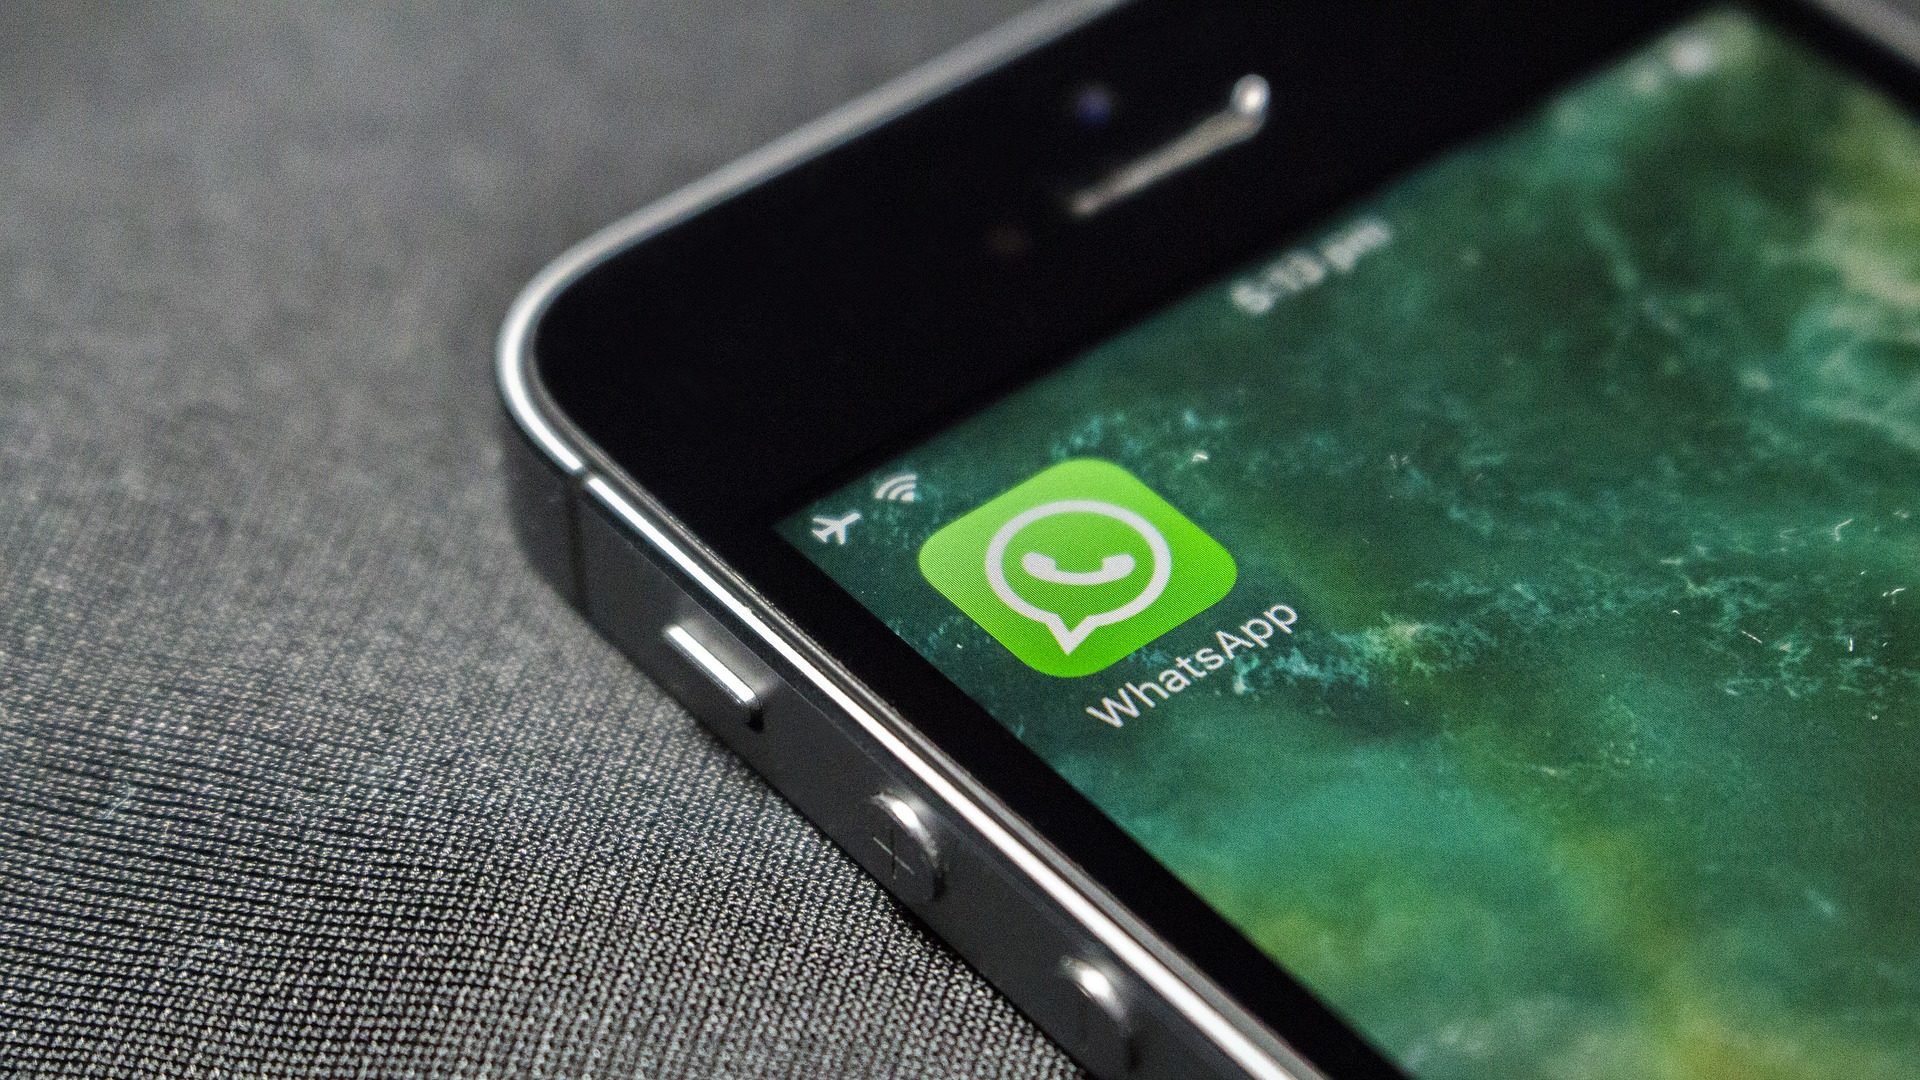 Procon-SP wants to discuss WhatsApp privacy policy with Facebook | Applications and Software